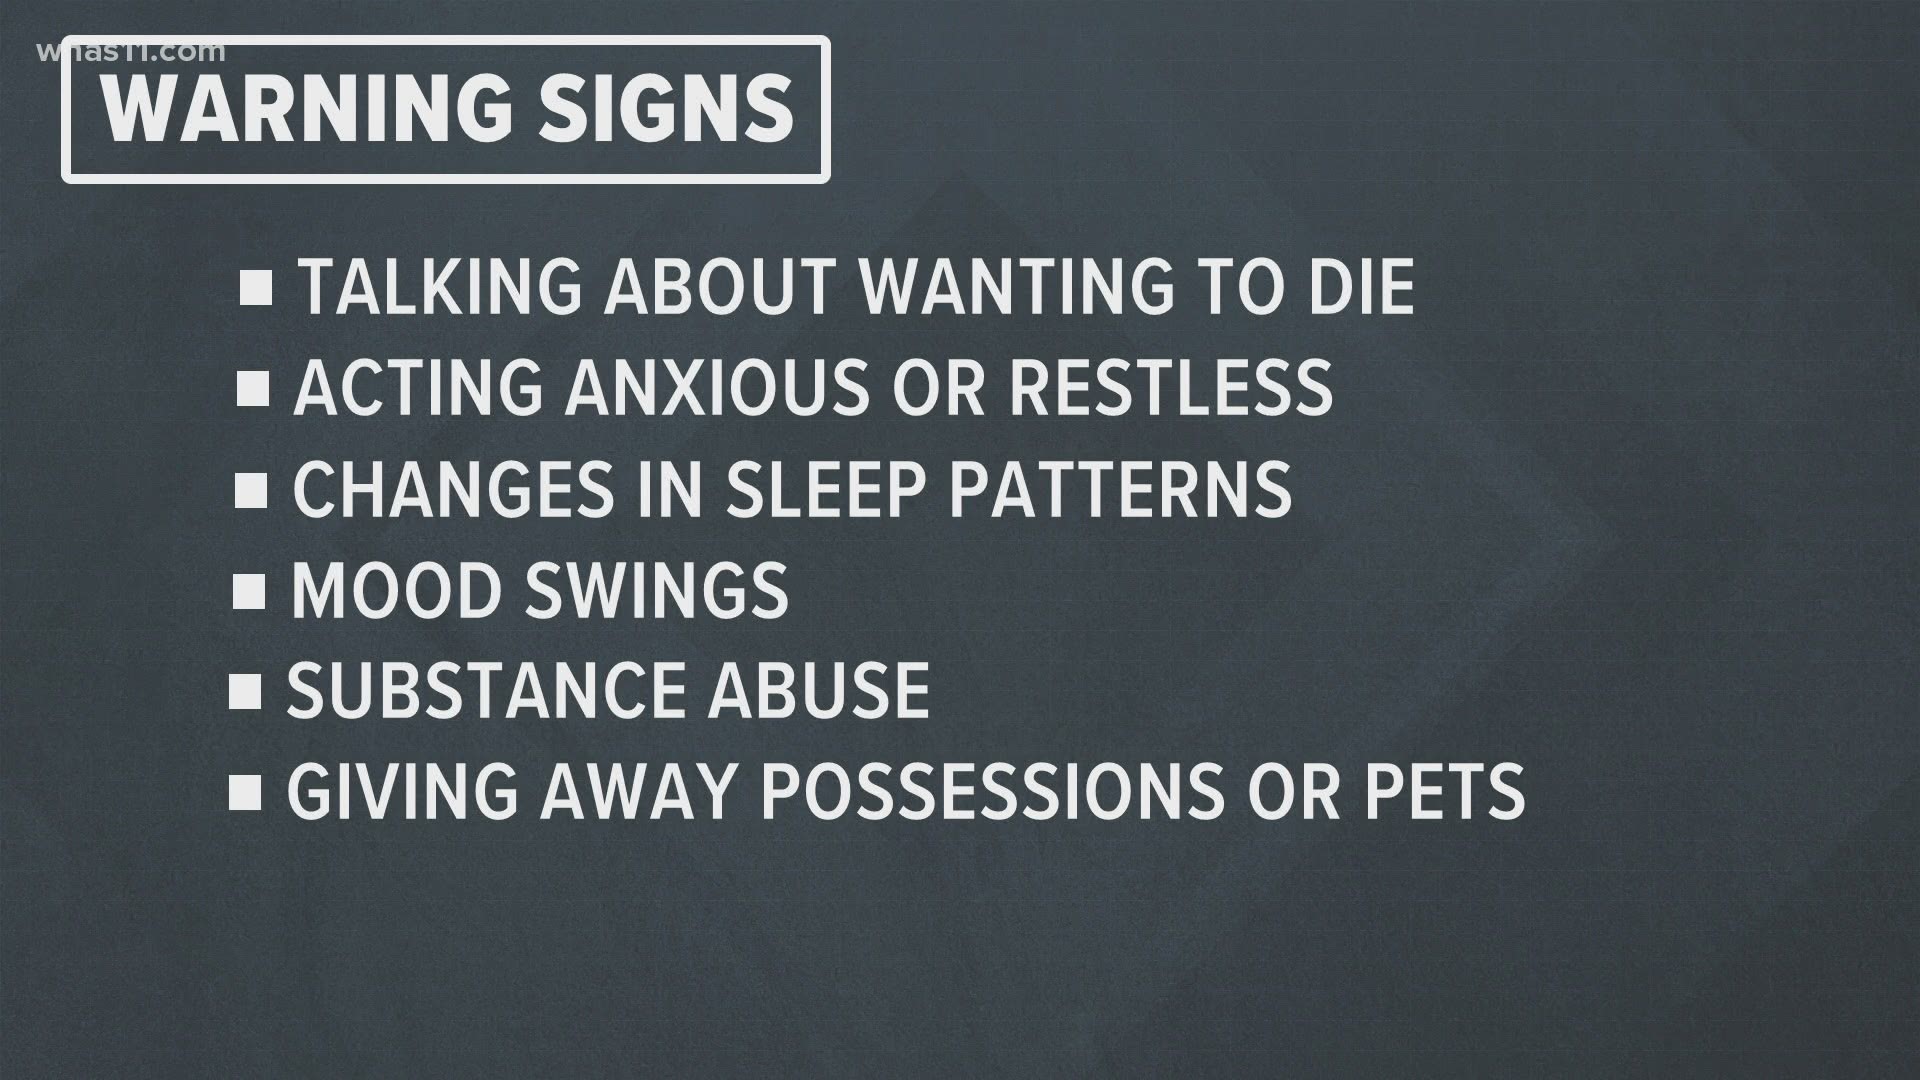 The coronavirus pandemic can take a toll on our mental health. Be aware of the warning signs of suicide so you can help your friends and family if they need it.